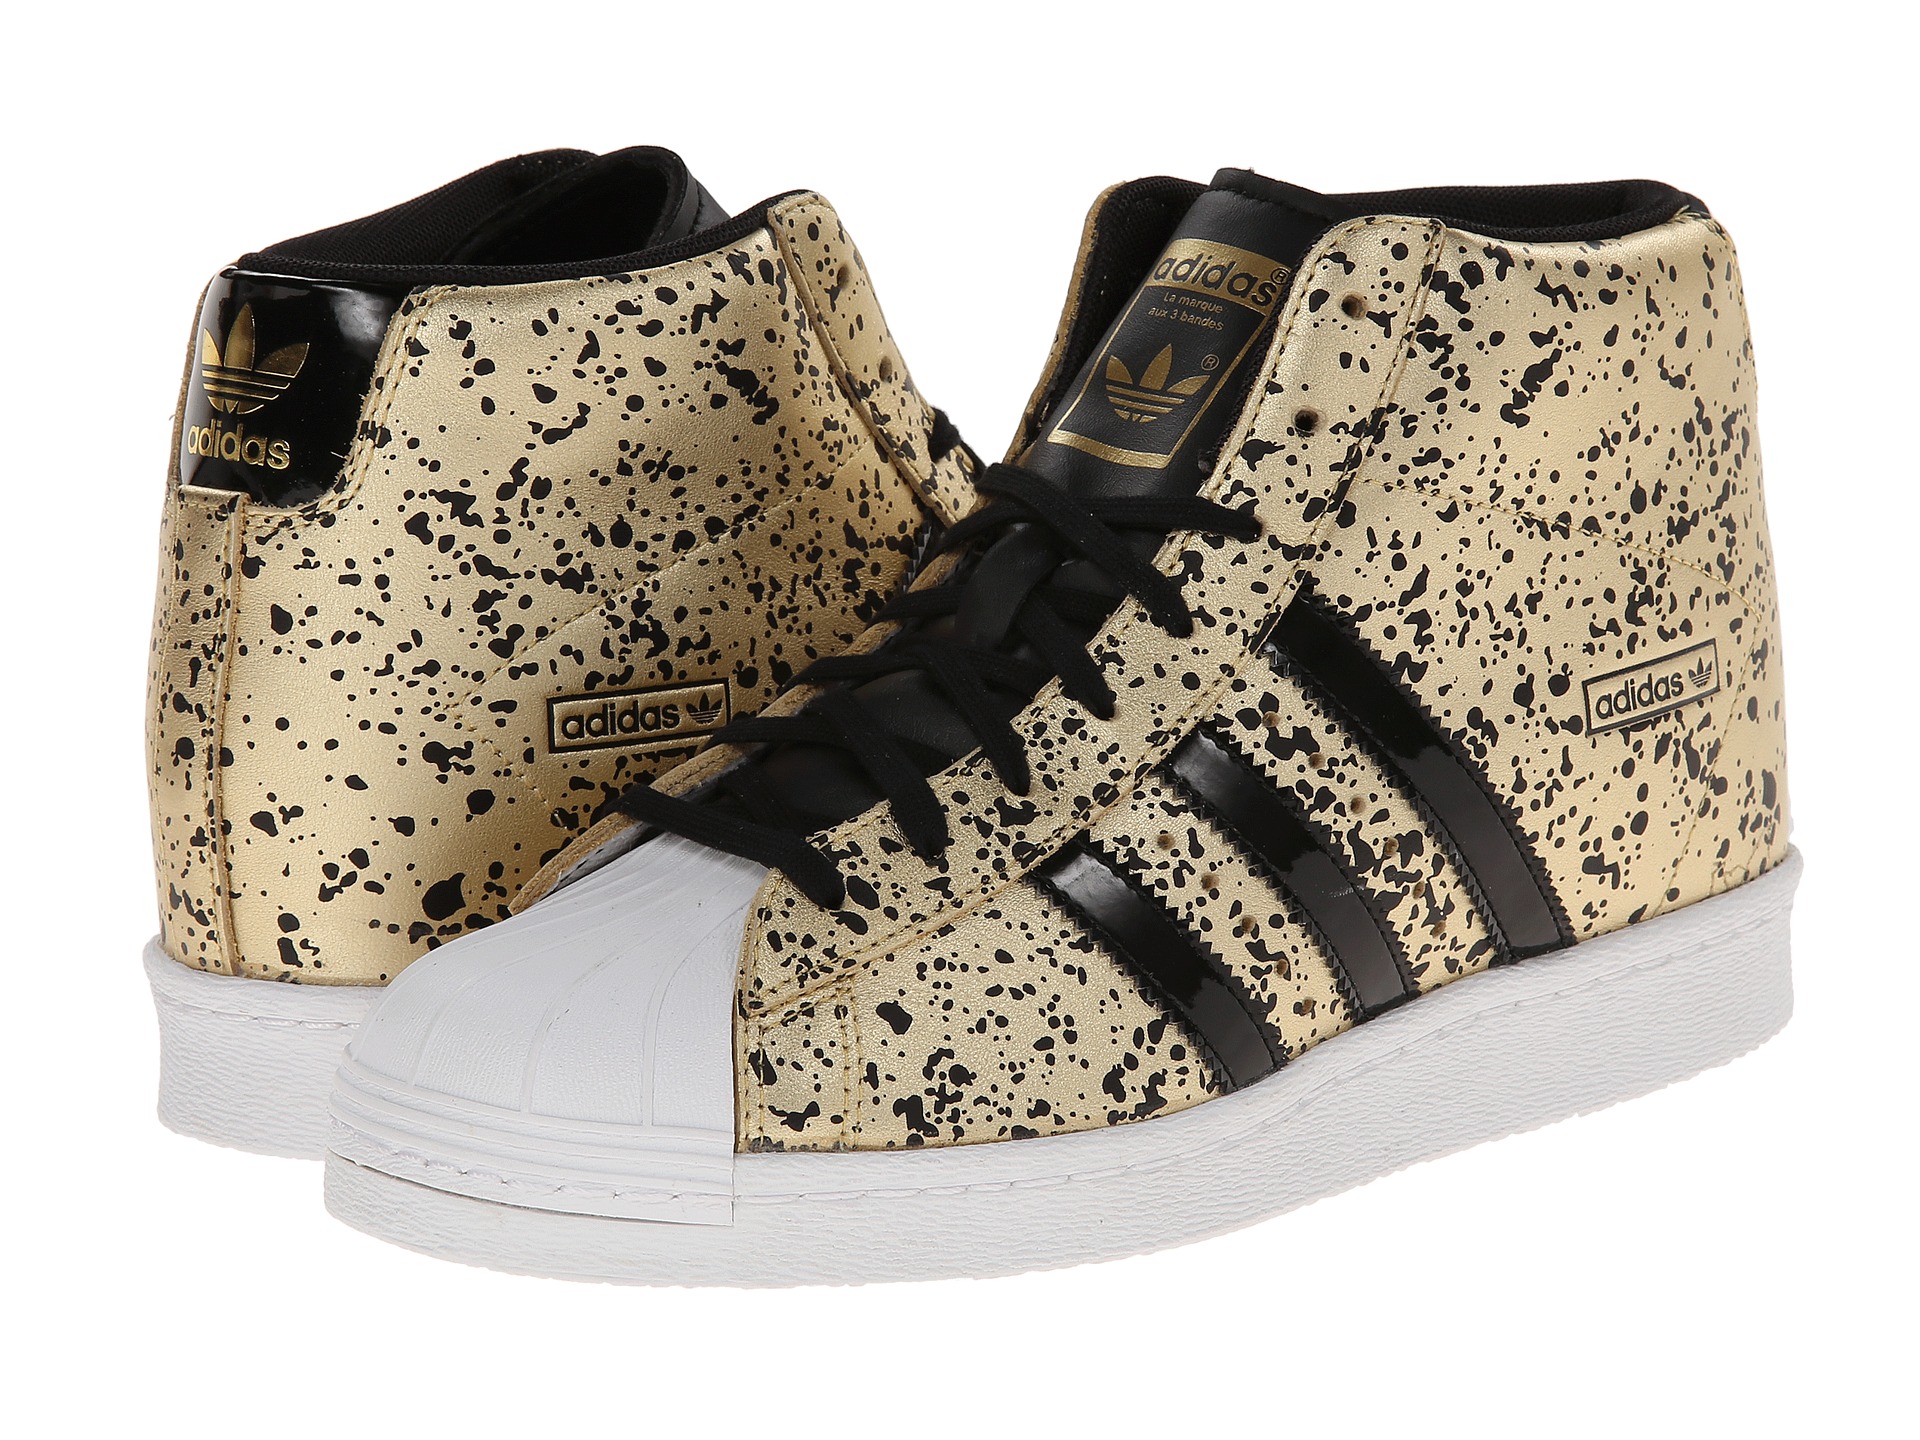 adidas Superstar Lace Up Floral Trainers for Women